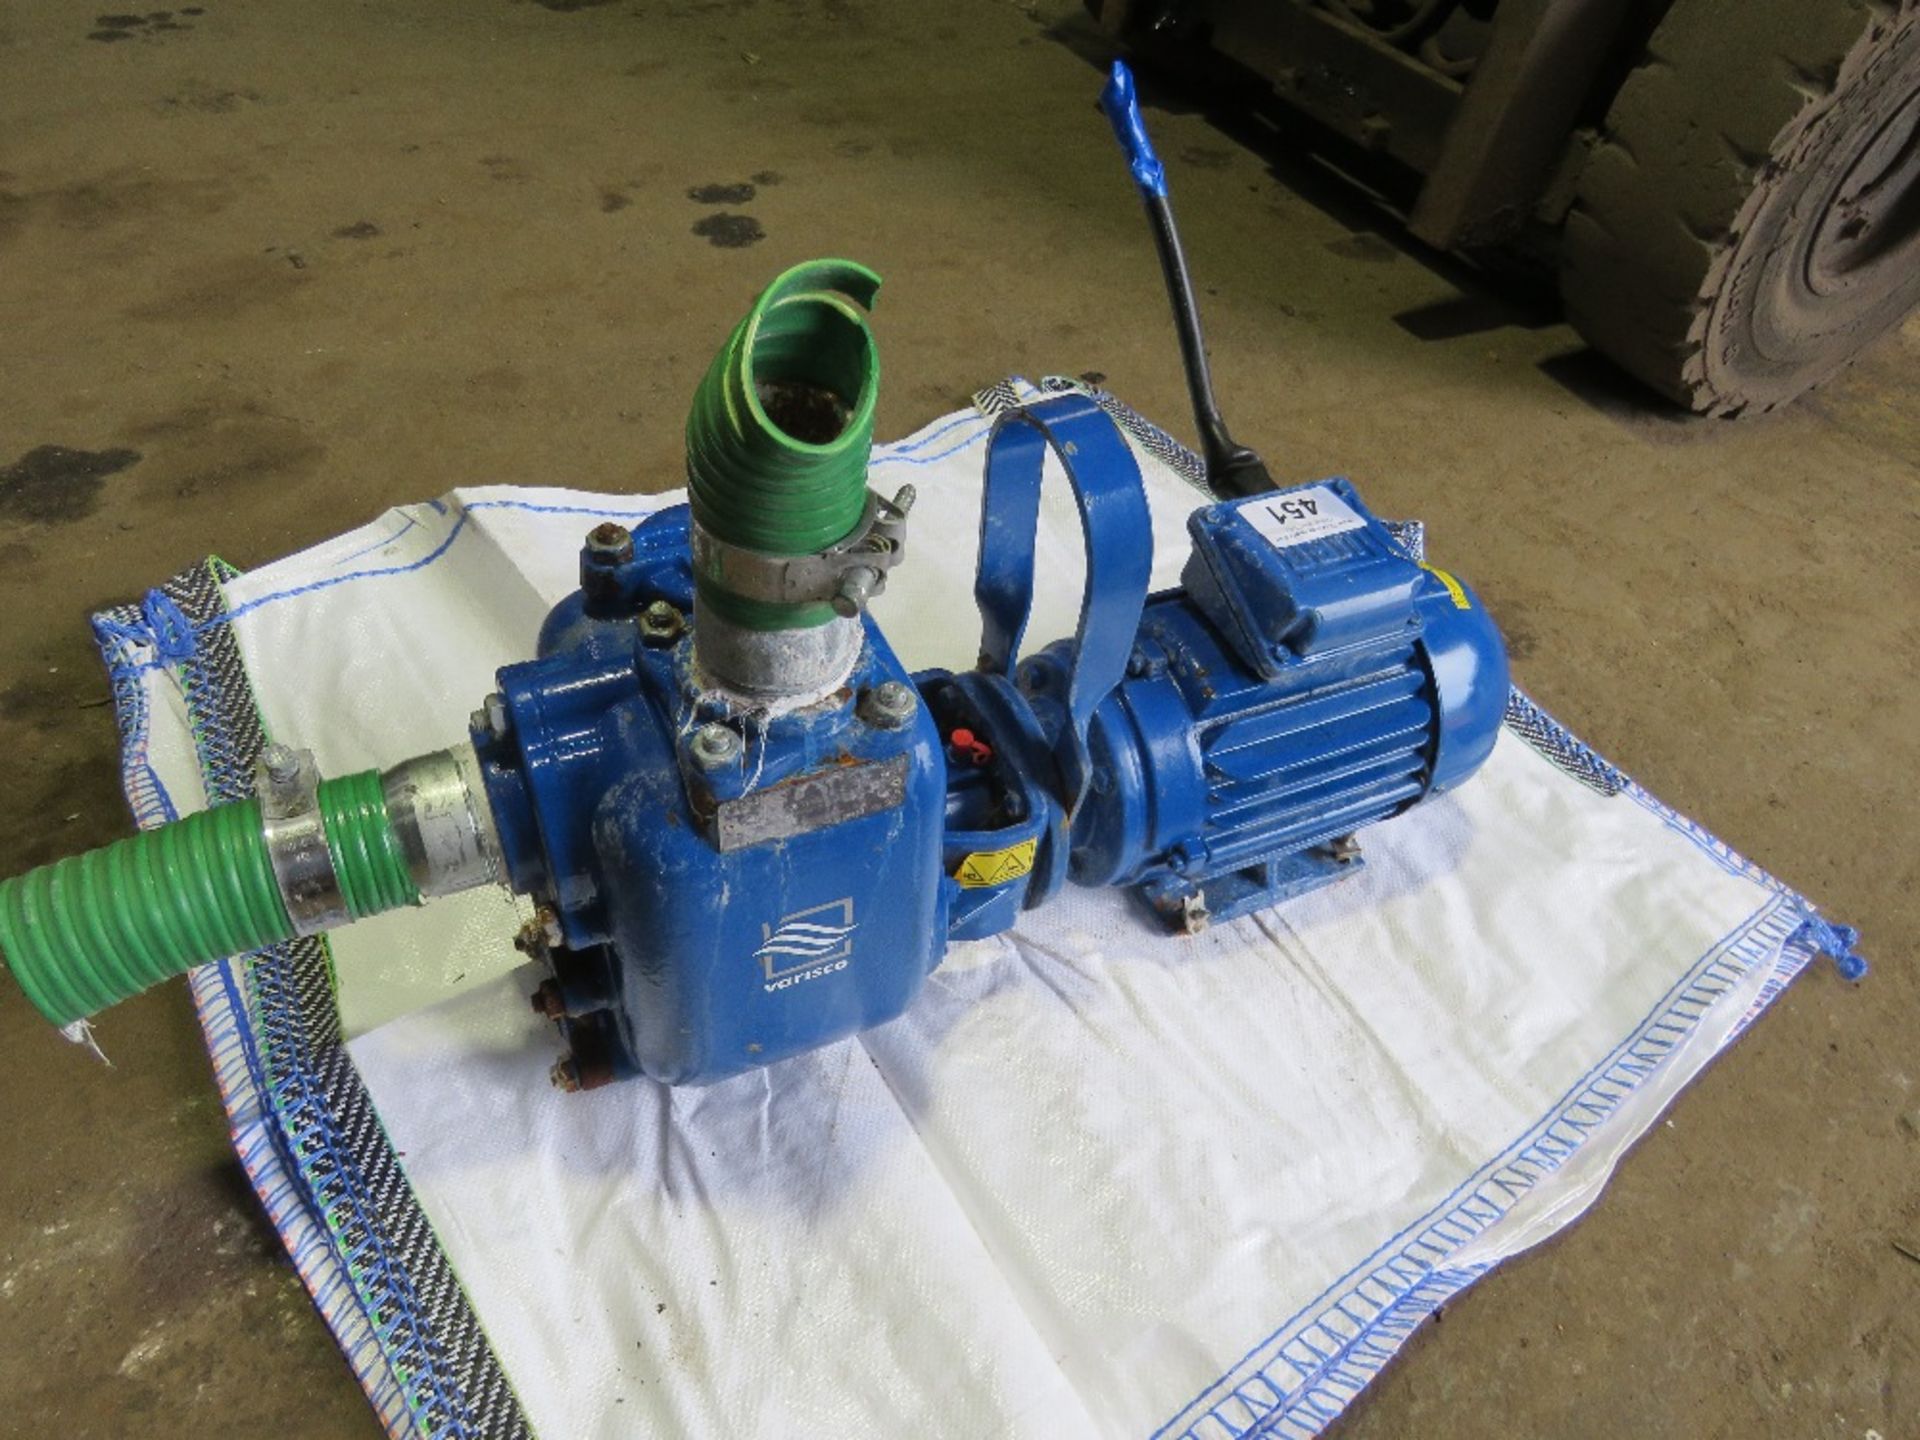 HIGH VOLUME WATER PUMP. WORKING WHEN REMOVED. DONE 4 MONTHS WORK ONLY. SOURCED FROM COMPANY LIQUIDA - Image 3 of 3